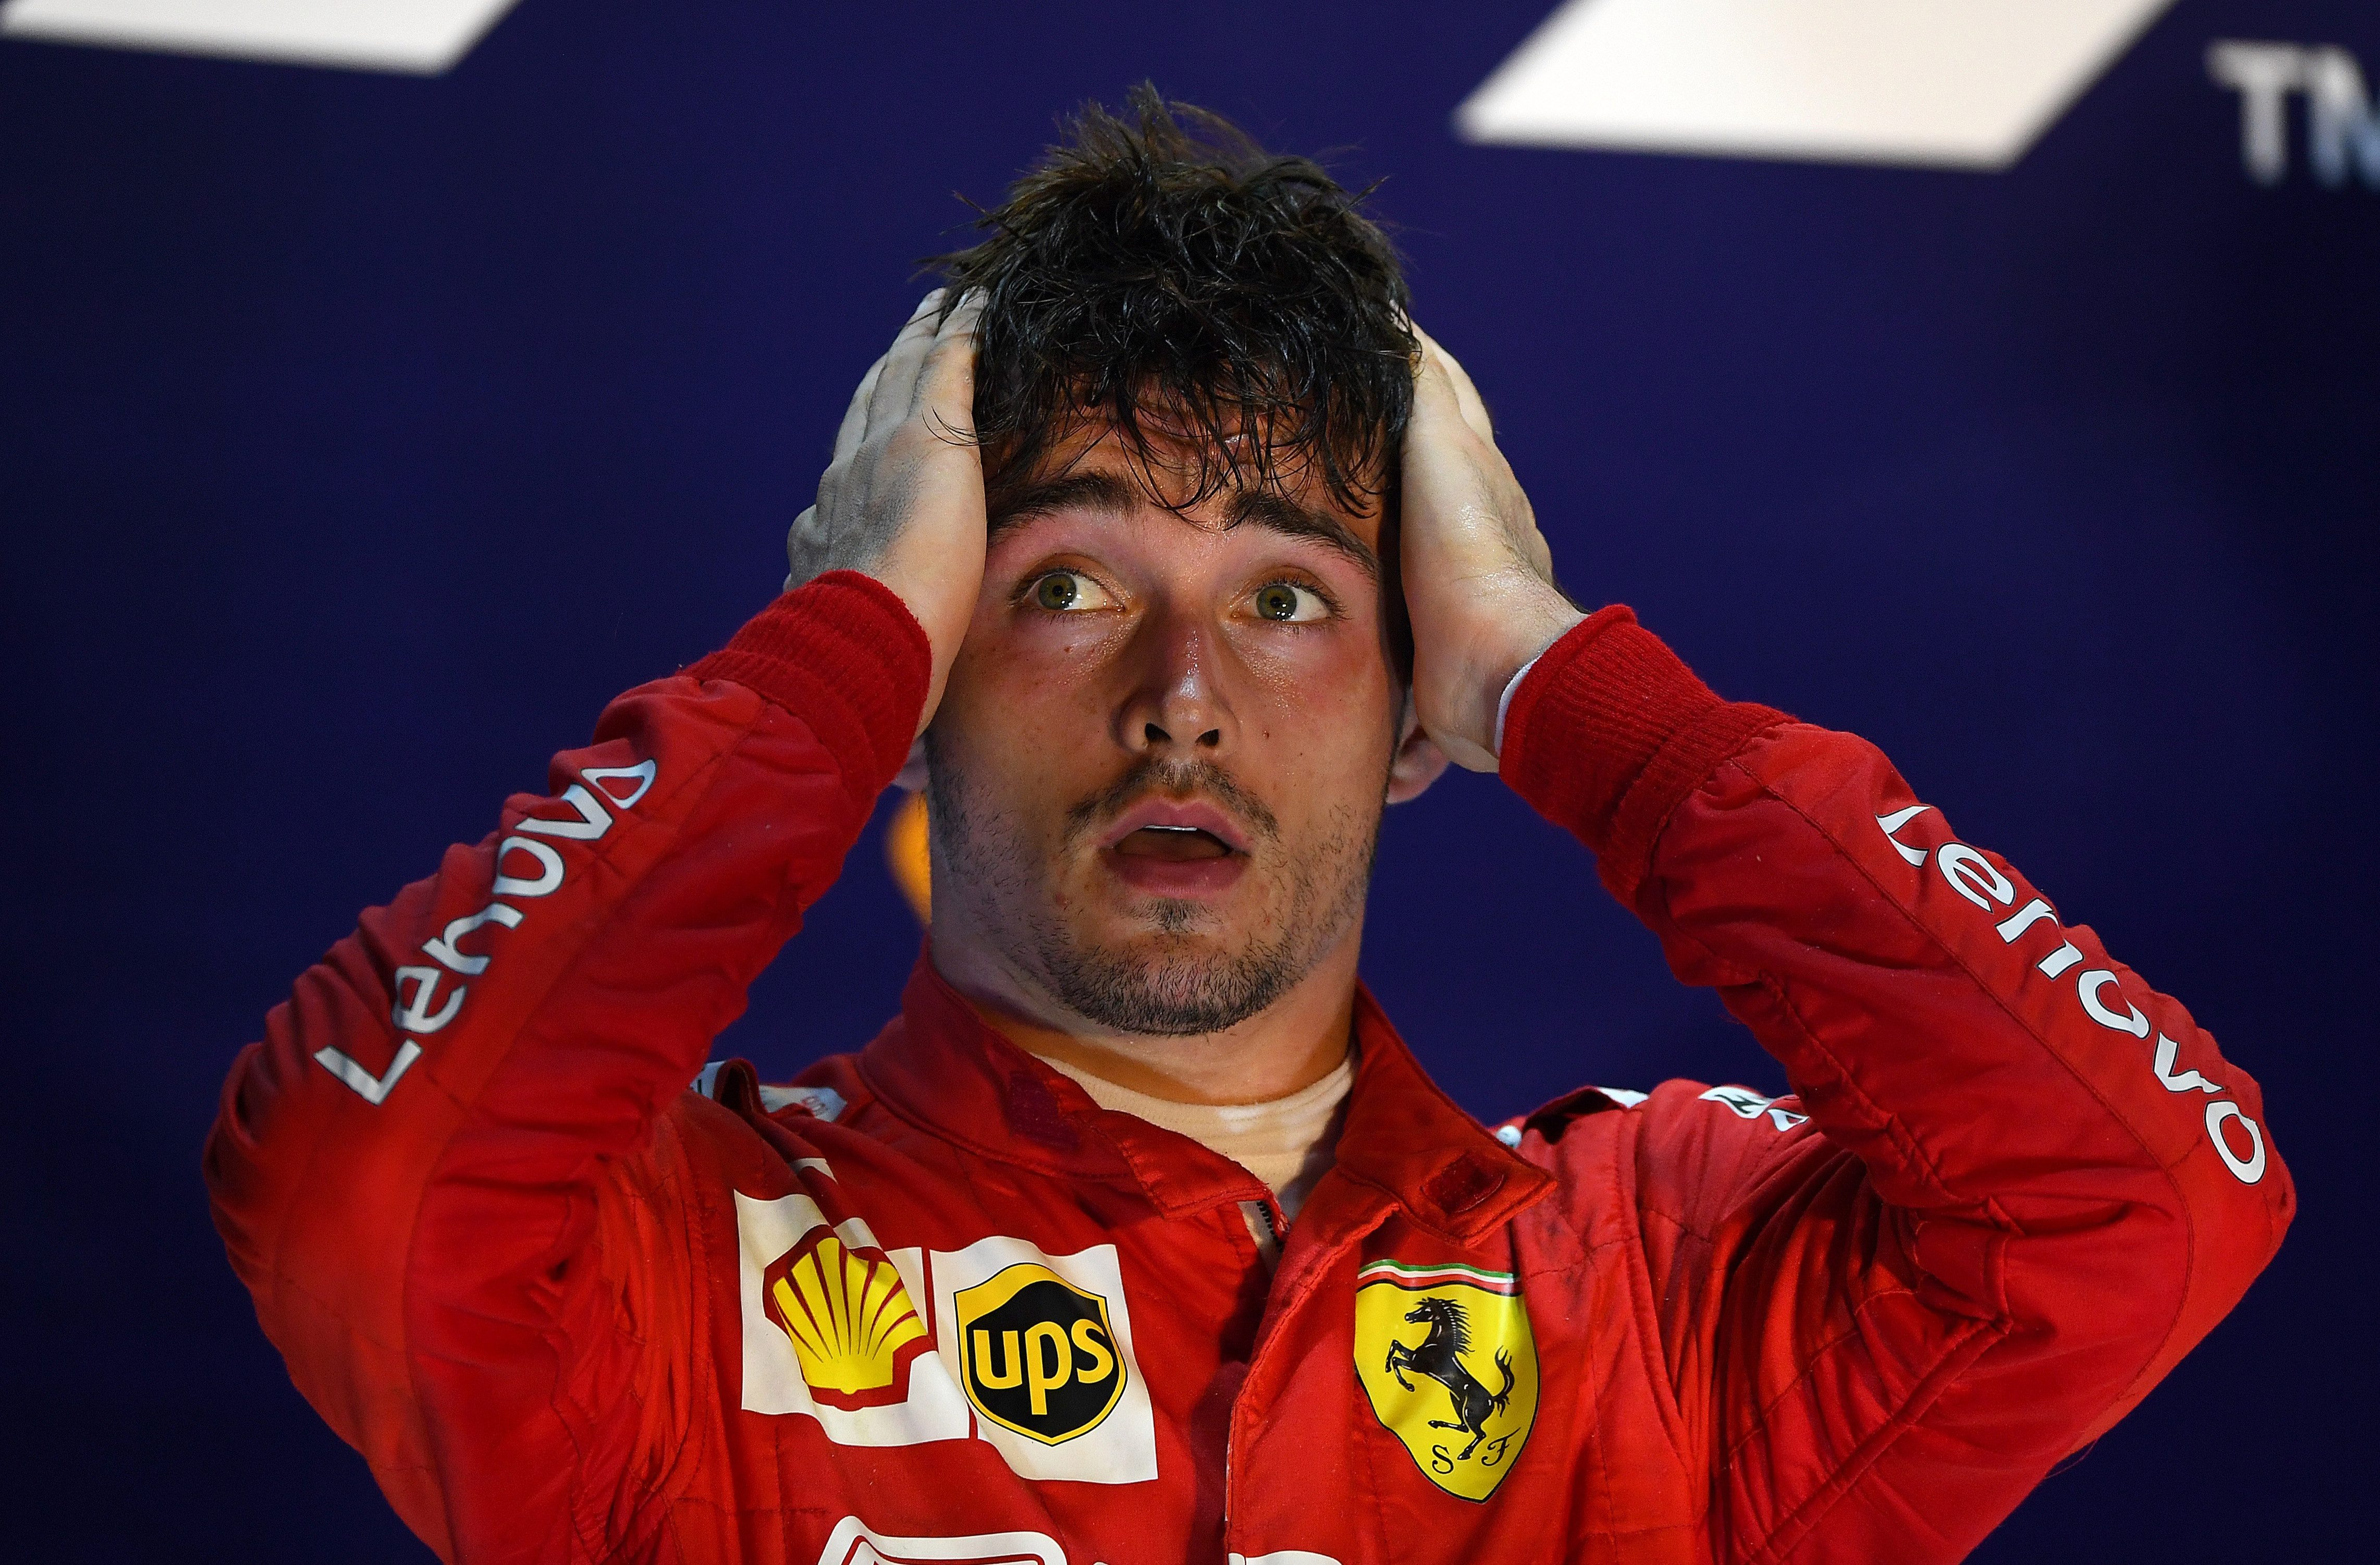 Charles LeClerc reacts in Singapore